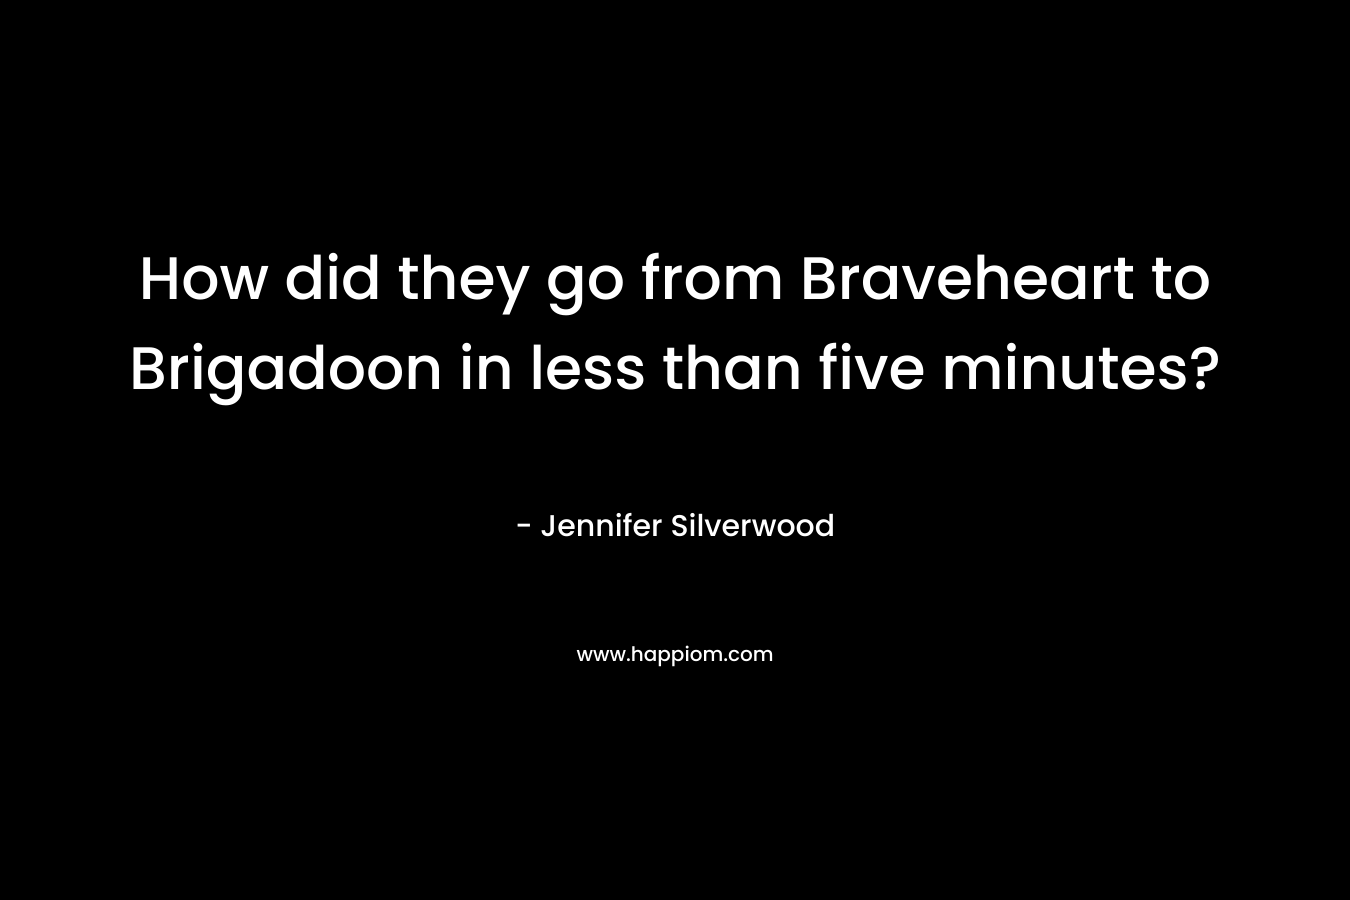 How did they go from Braveheart to Brigadoon in less than five minutes? – Jennifer Silverwood